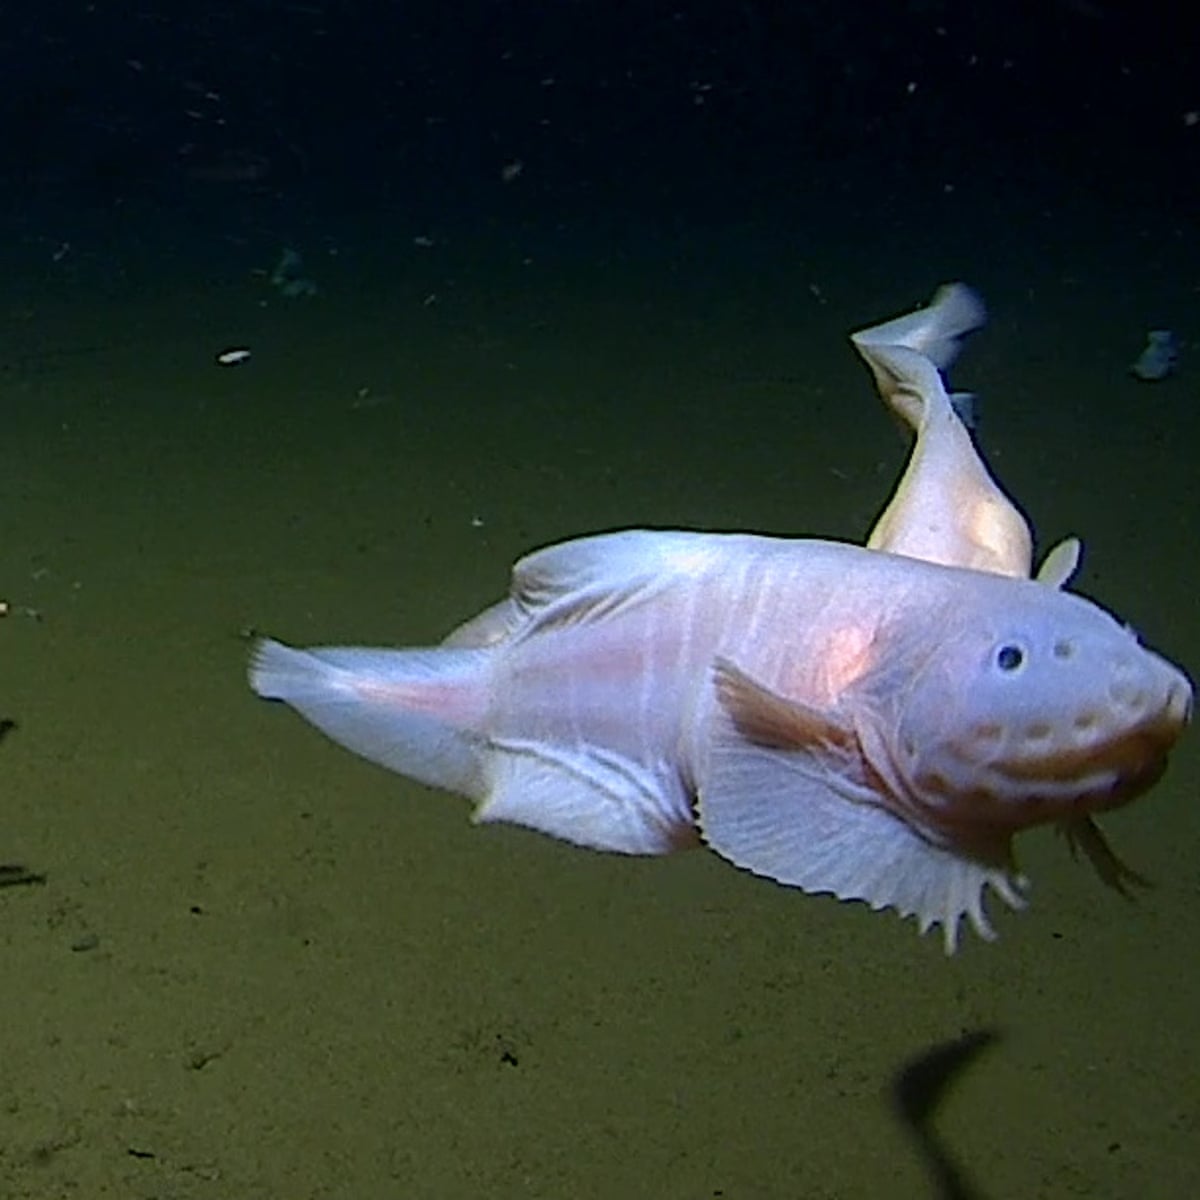 Scientists find deepest fish ever recorded at 8,300 metres underwater near  Japan, Fish